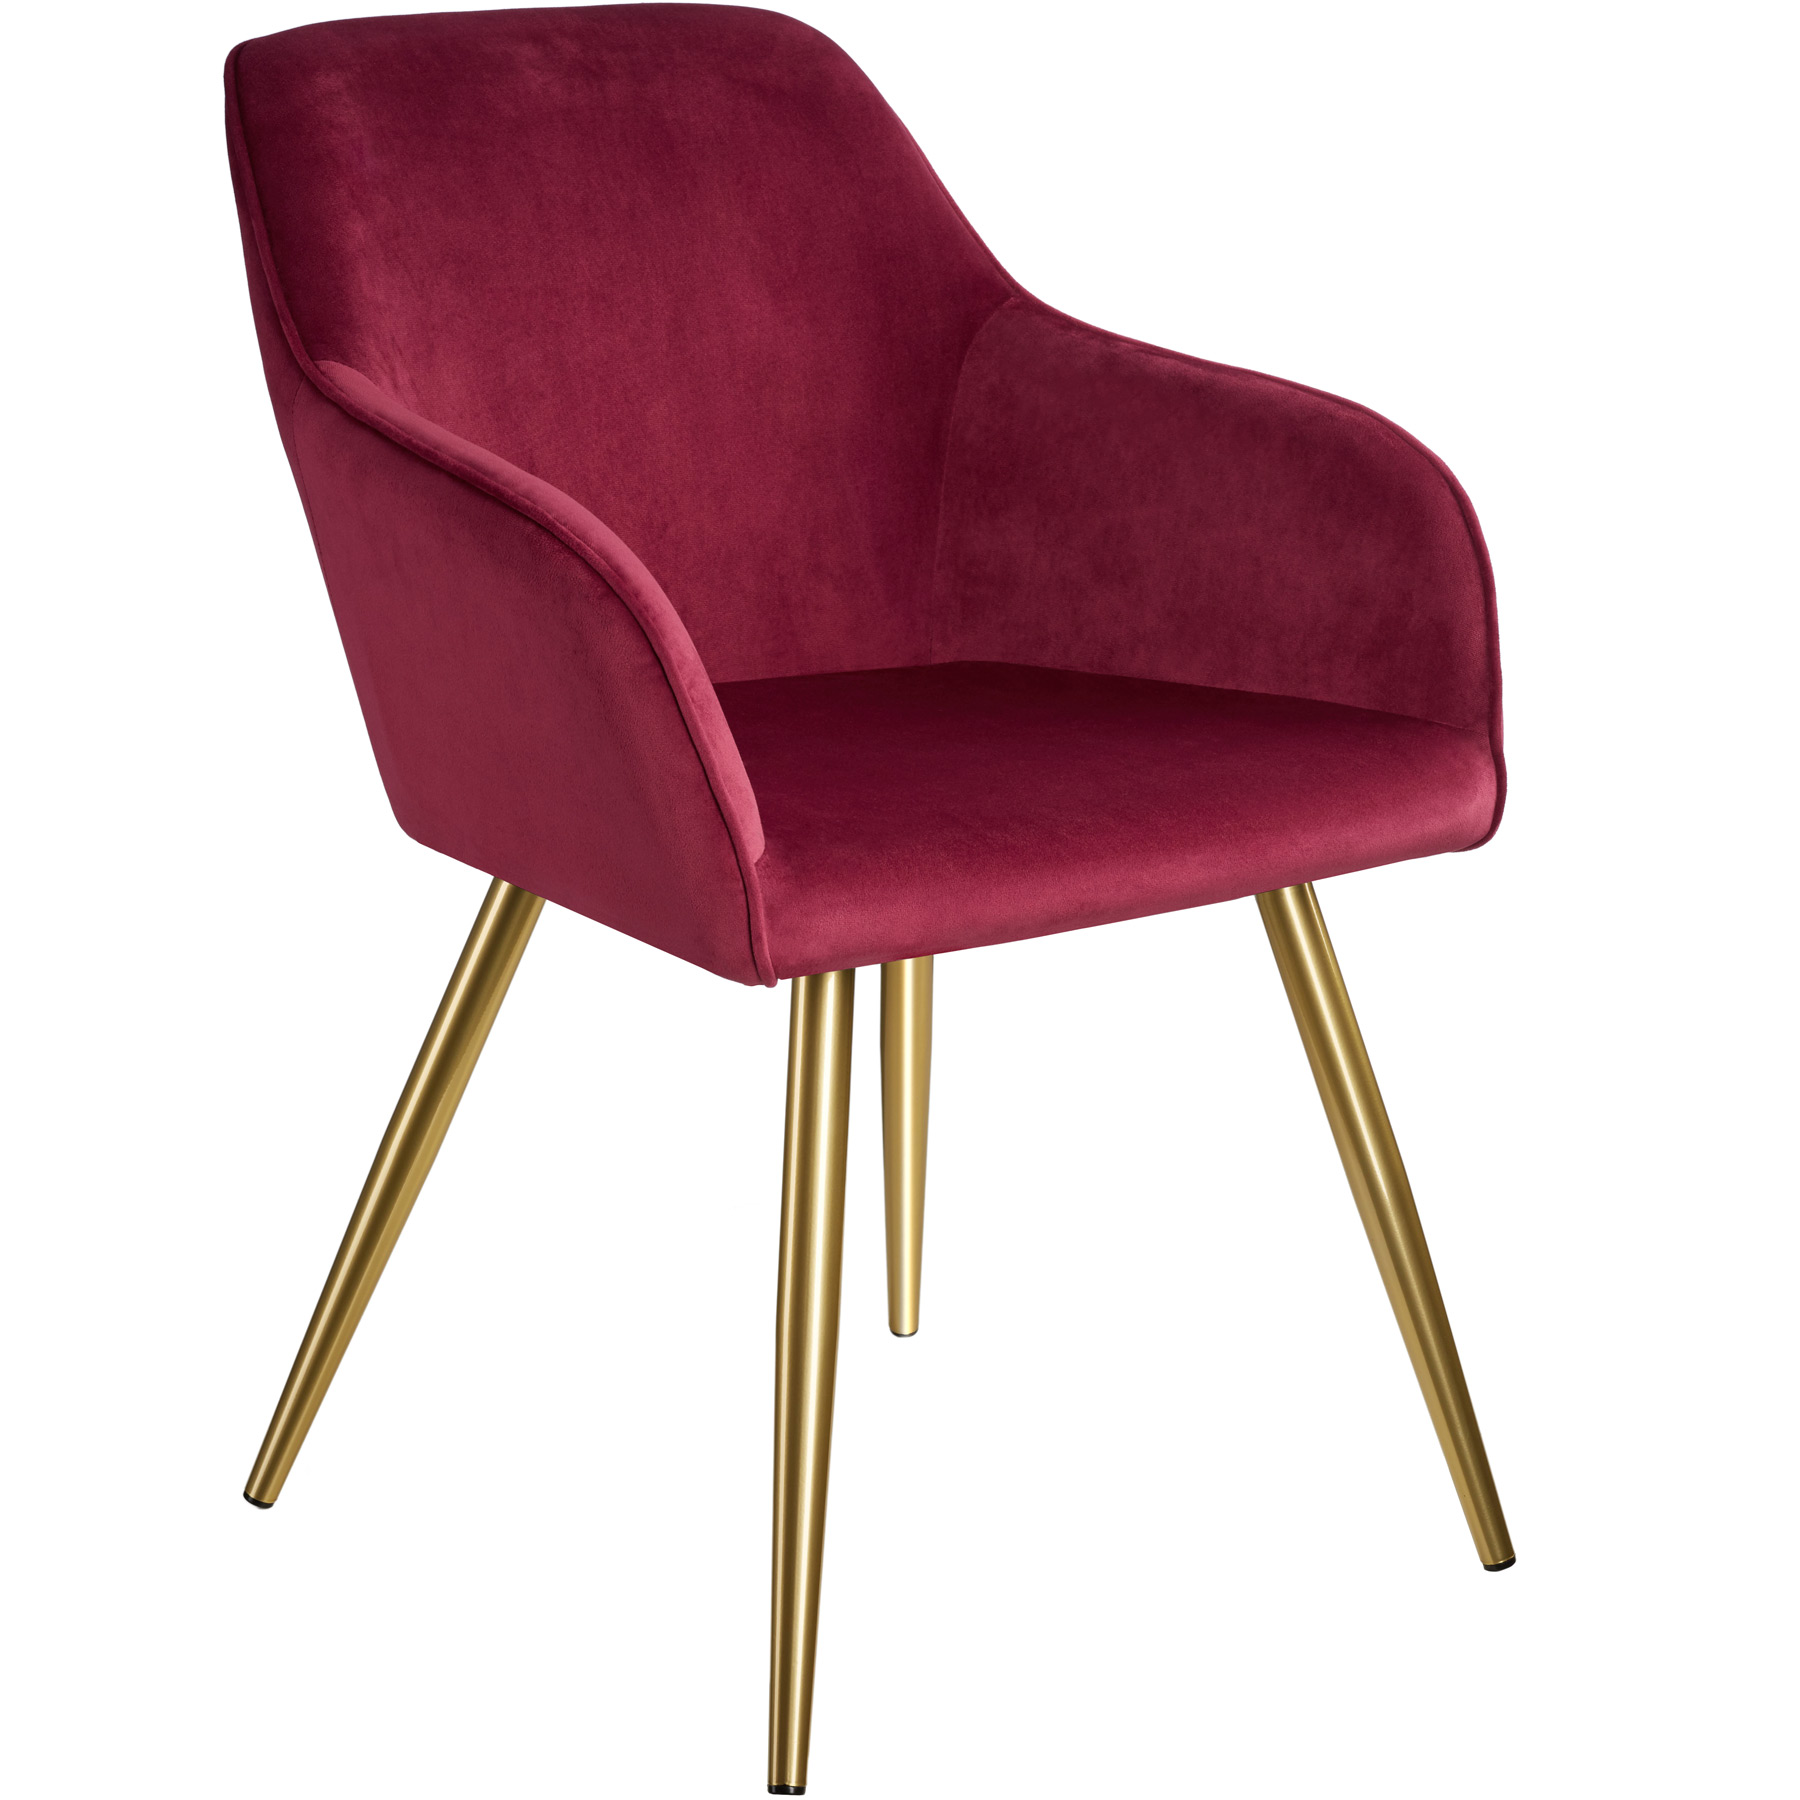 Chaise MARILYN Effet Velours Style Scandinave bordeaux/or